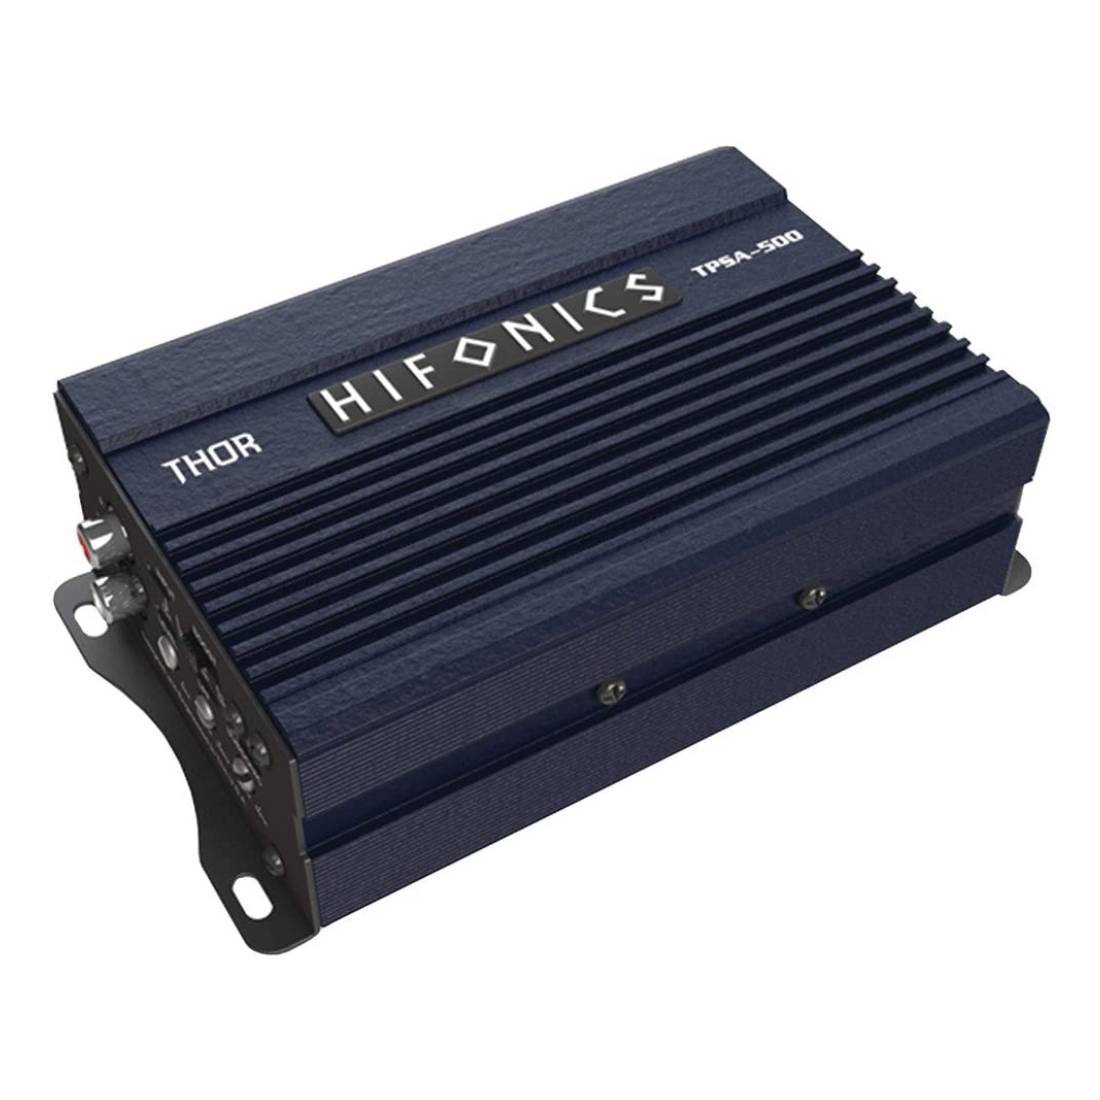 Hifonics TPS-A500.2 500 Watts Max 2-Ohm Stable 2-Channel THOR Powersports Car Audio Amplifier